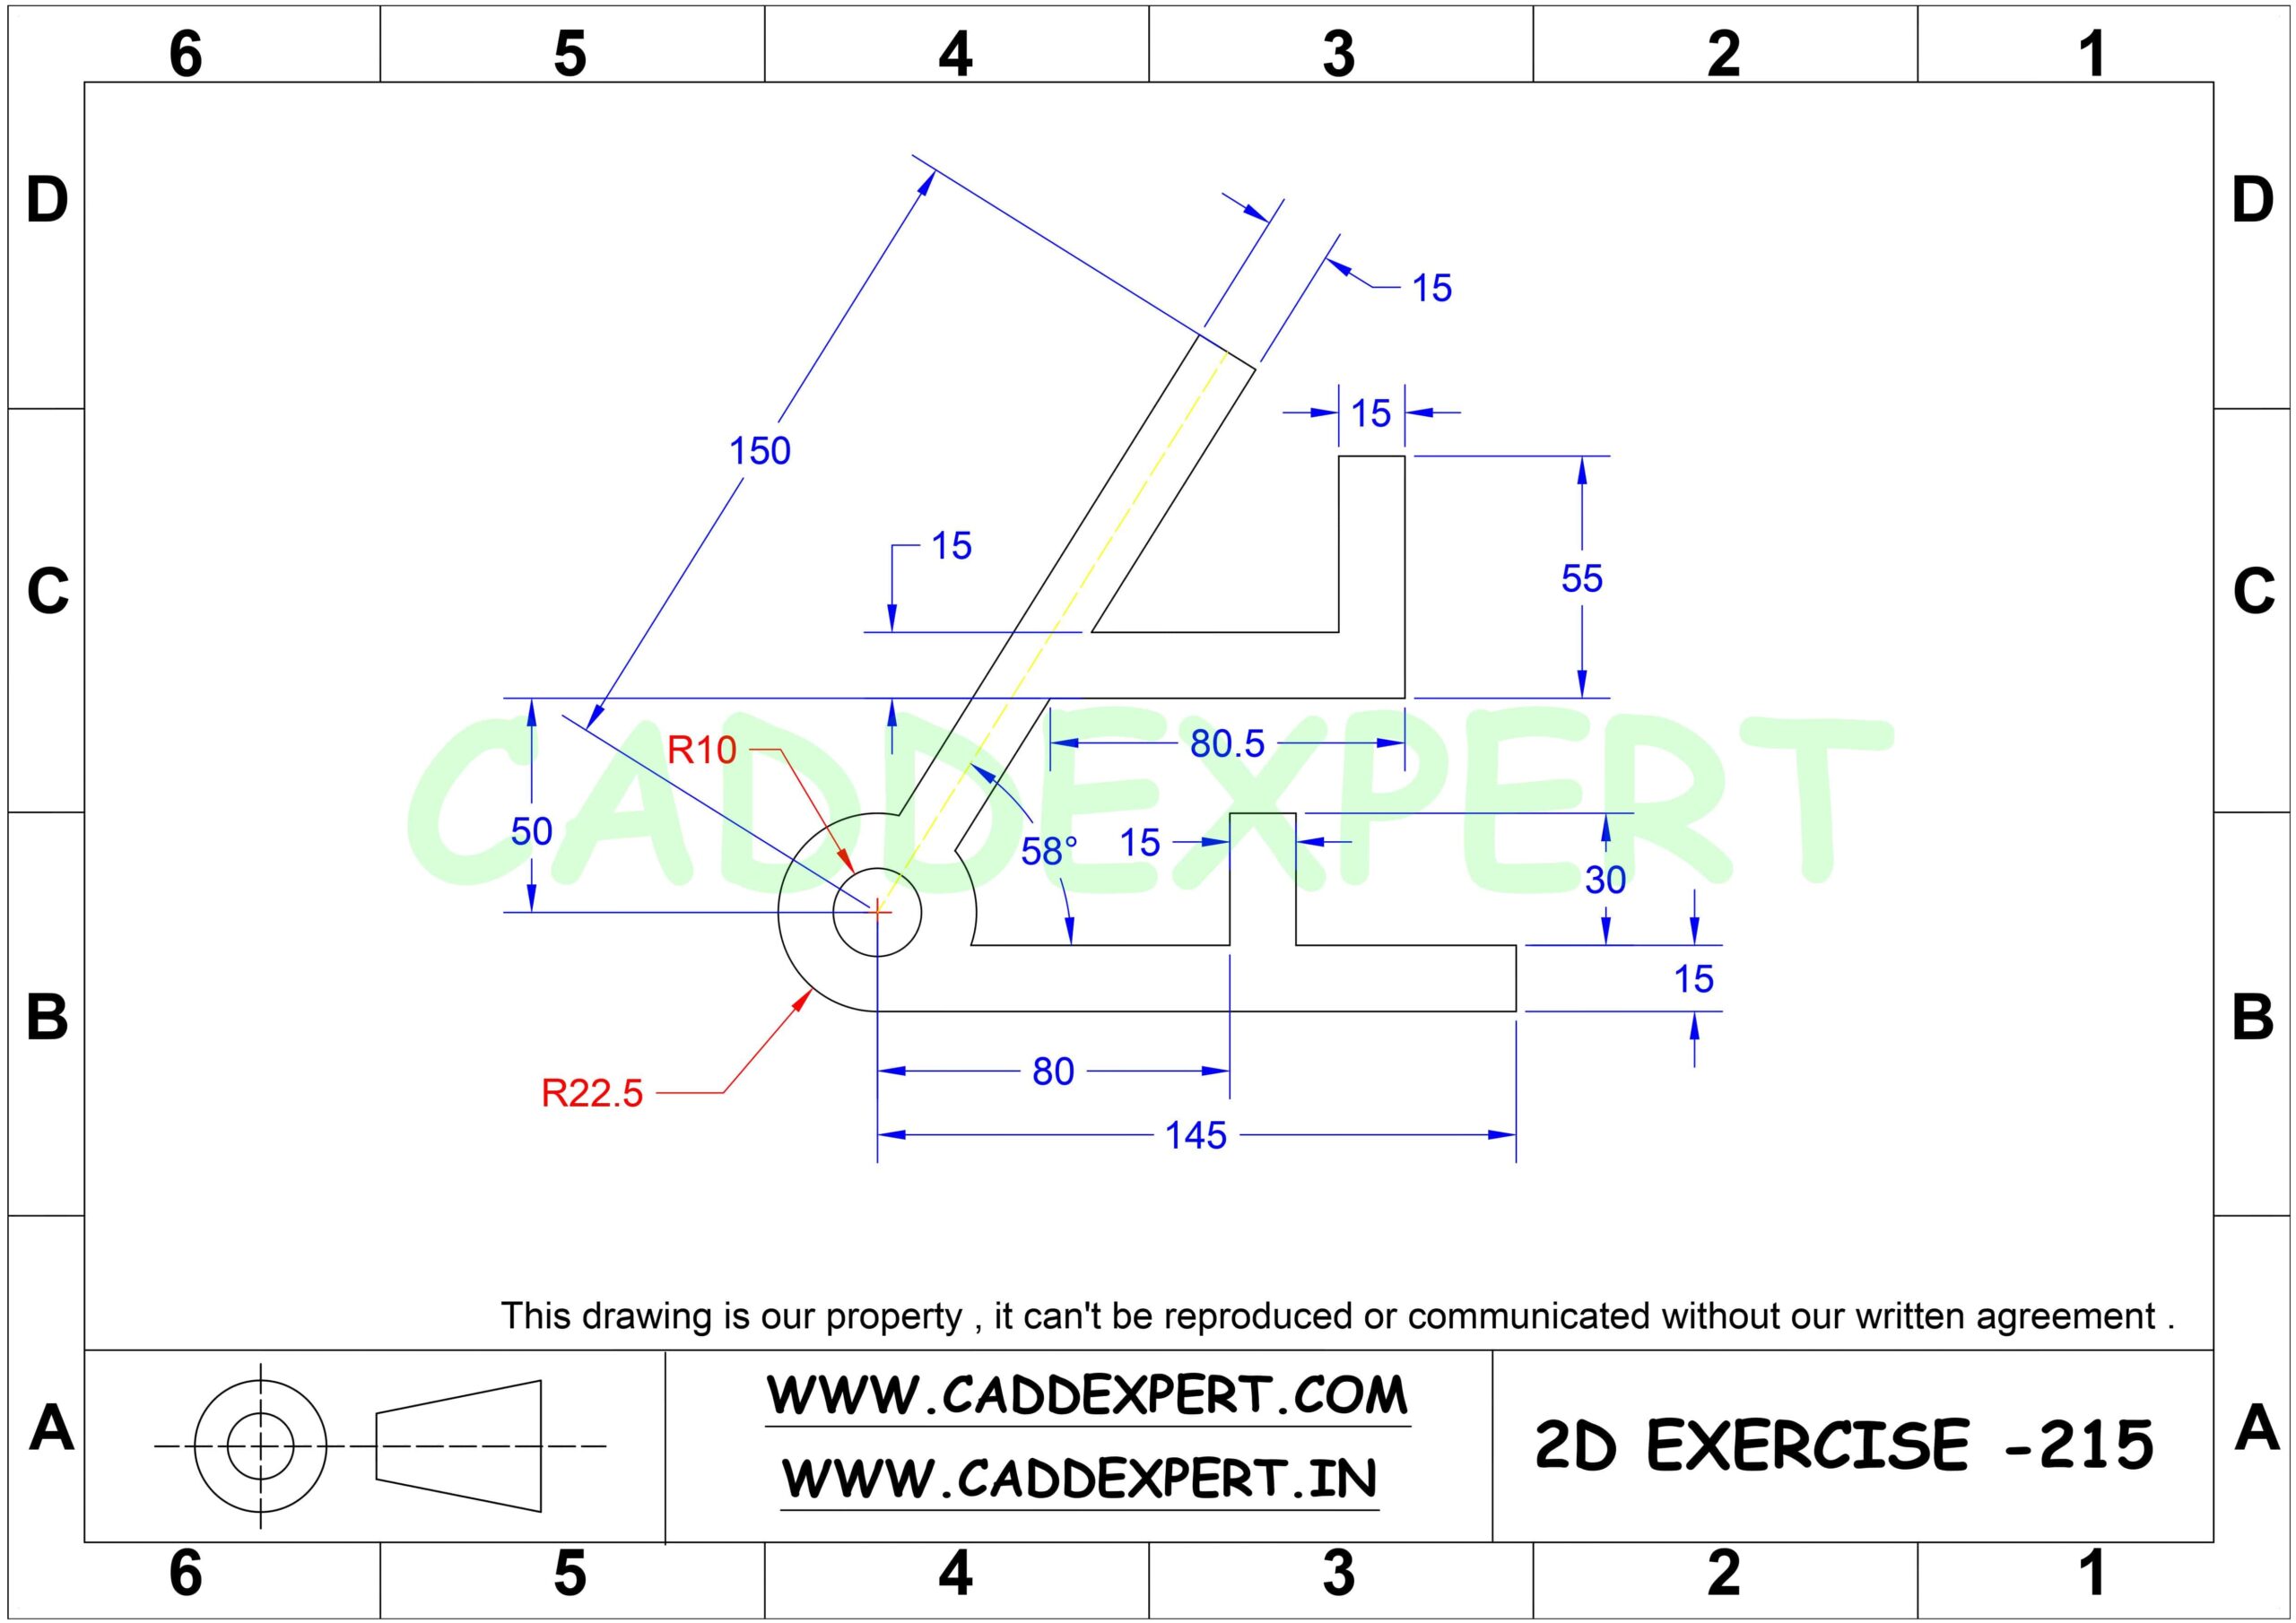 50 AUTOCAD PRACTICE DRAWING 15